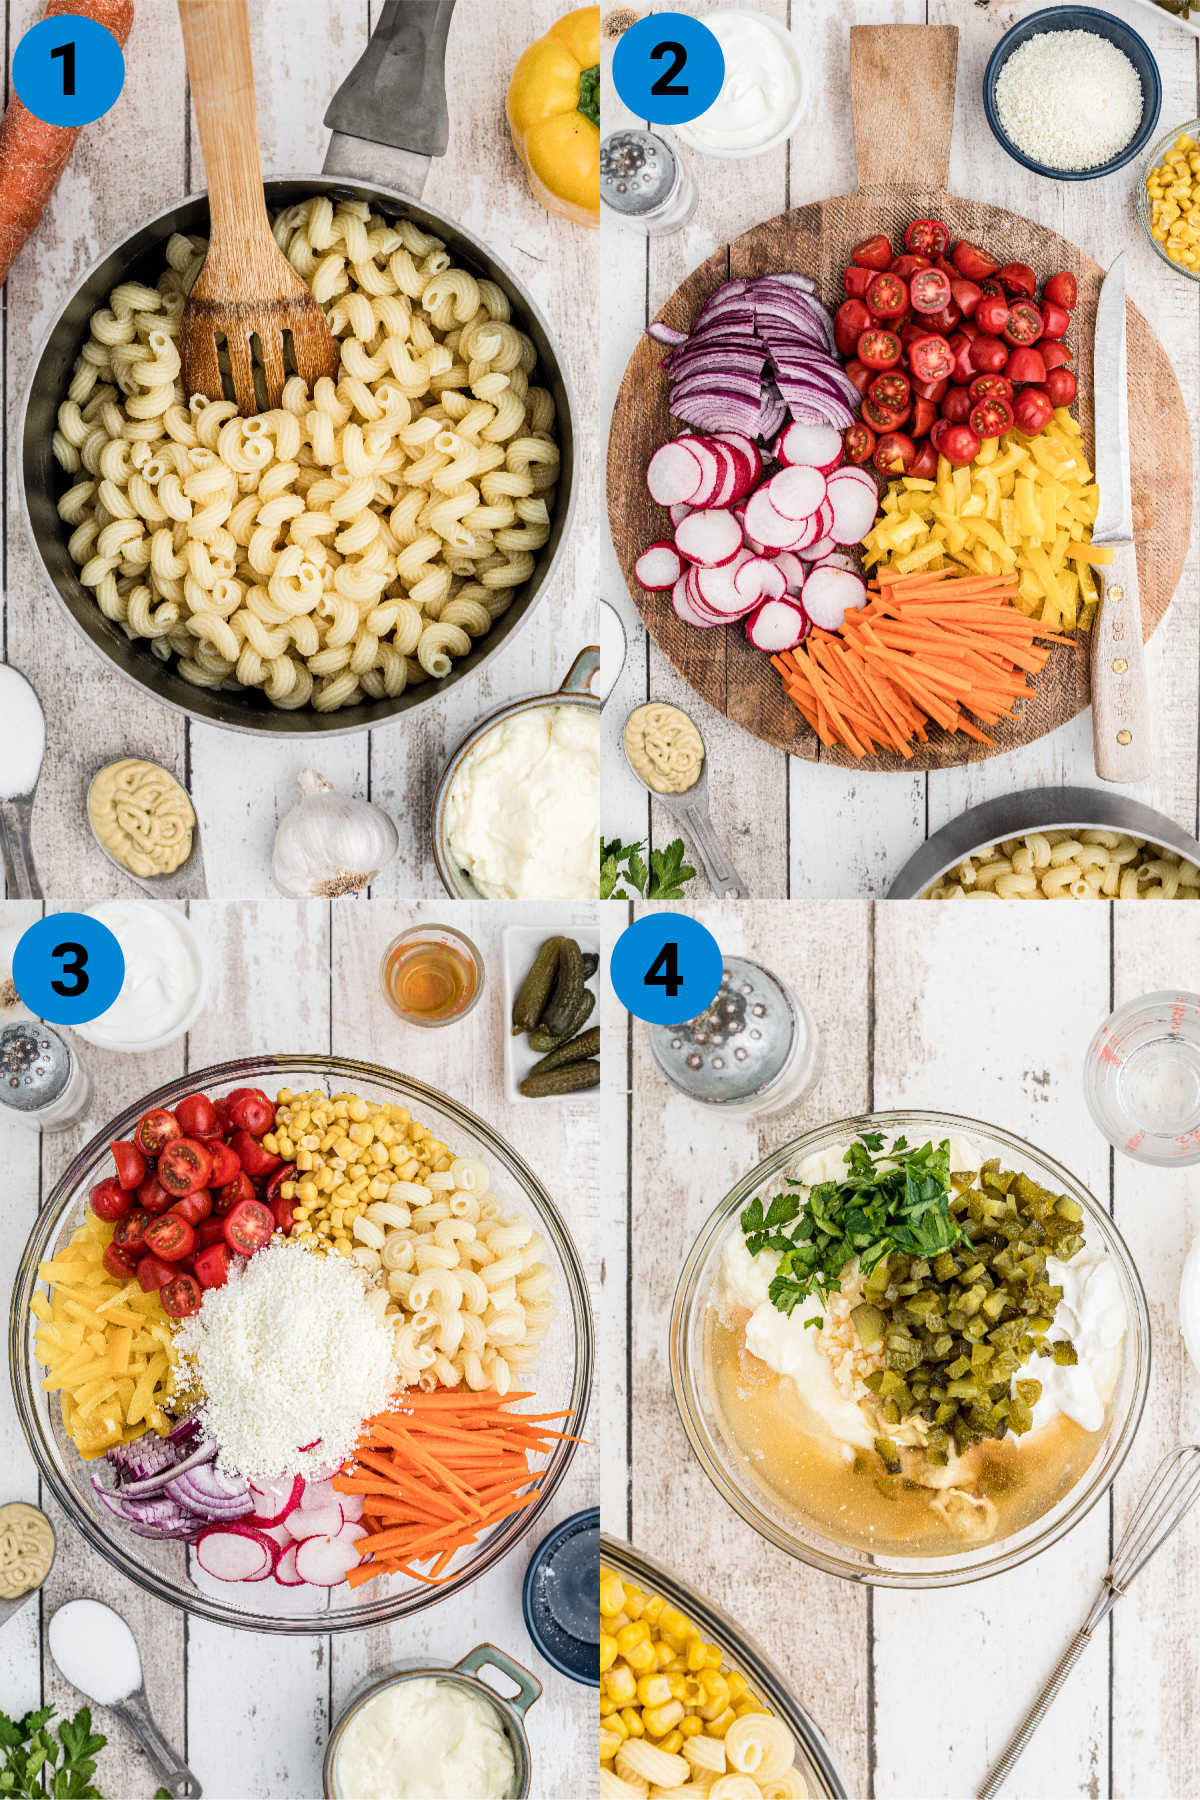 recipe steps showing how to make a summer pasta salad